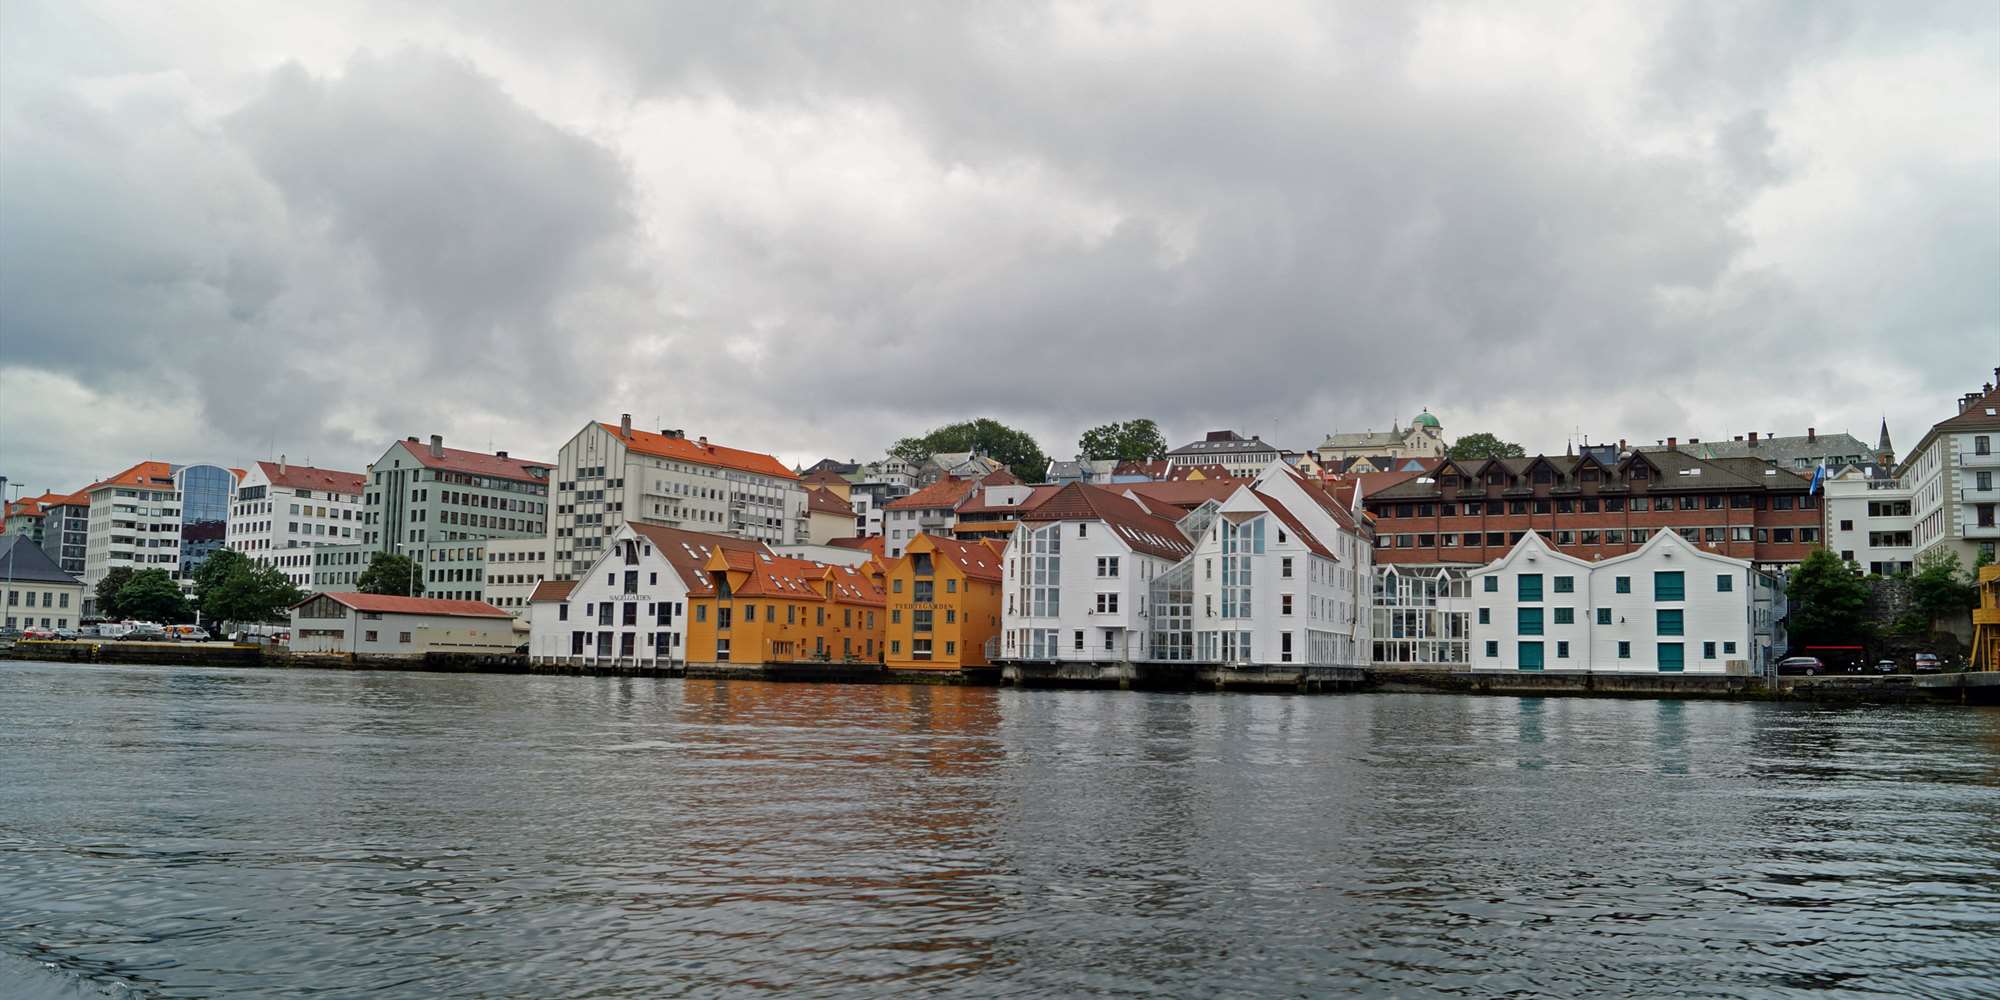 Discover Bergen by boat – a great way to see the historical sights